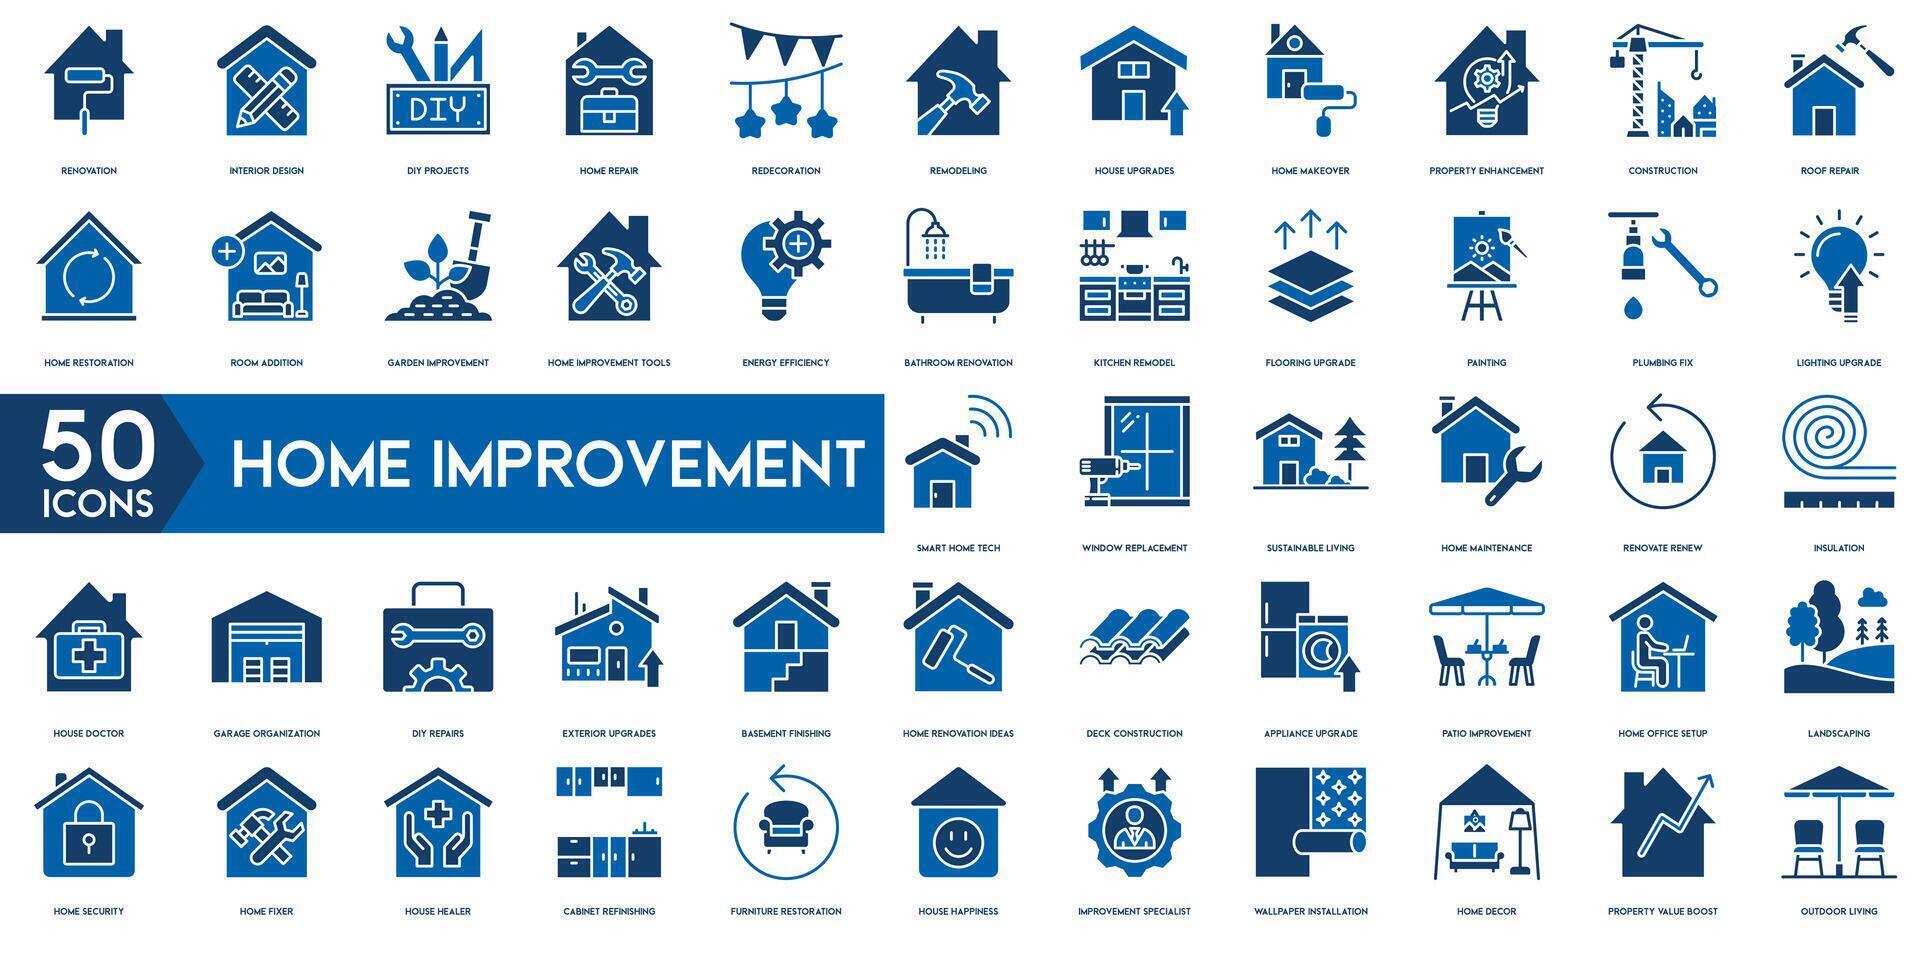 Home Improvement icon. Renovation, Interior Design, DIY Projects, Home Repair, Redecoration, Remodeling, House Upgrades, Home Makeover, Property Enhancement and Construction icon. vector